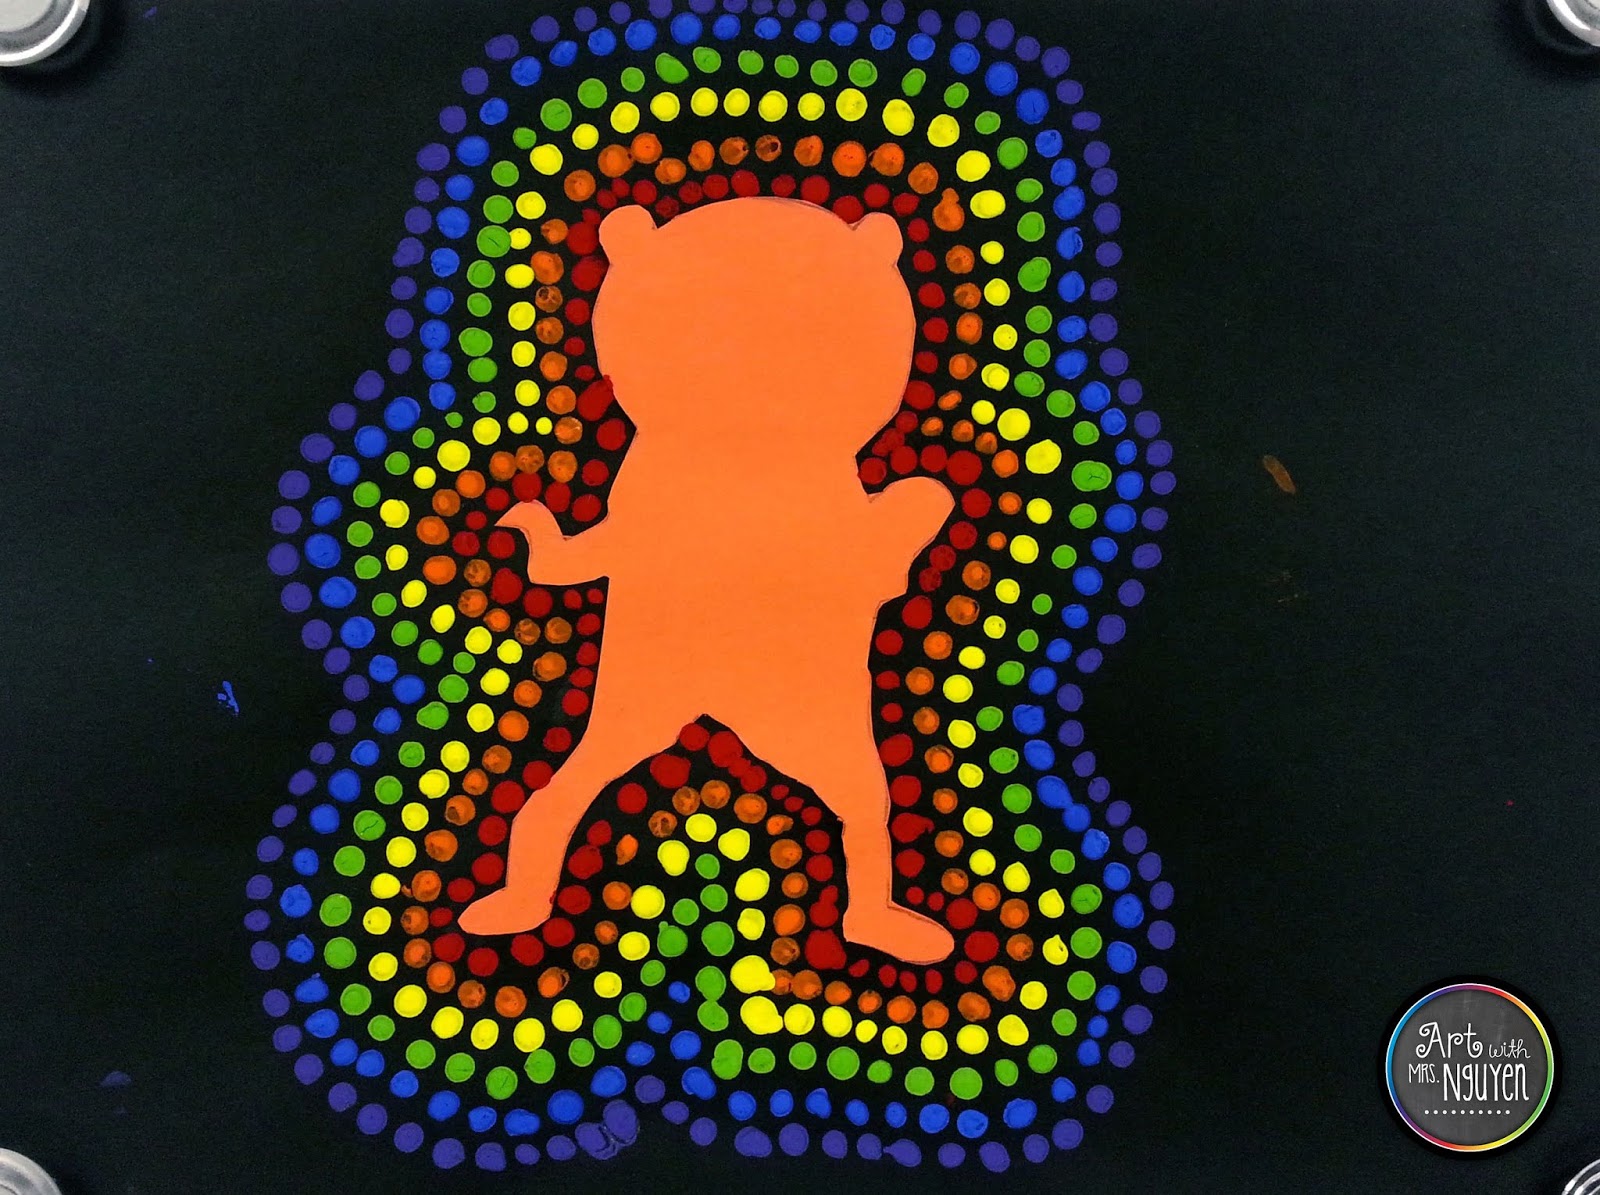 5th Grade – Dot Painting inspired by Australian Aborigines – In